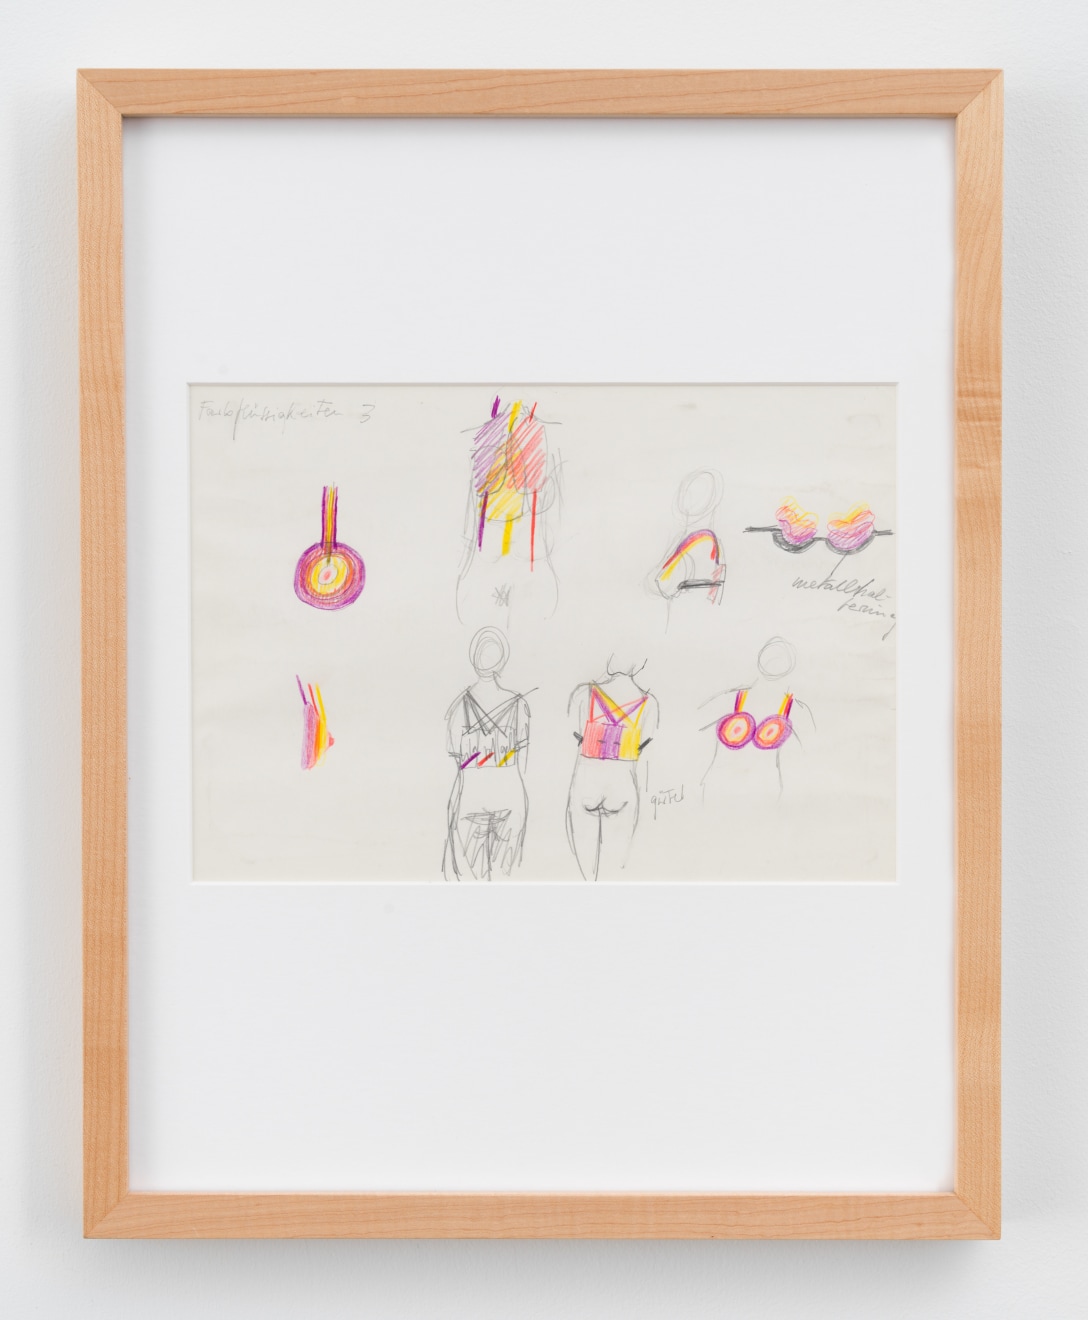 Untitled (Coloured Liquids), 1968-1969, pencil and colored pencil on paper